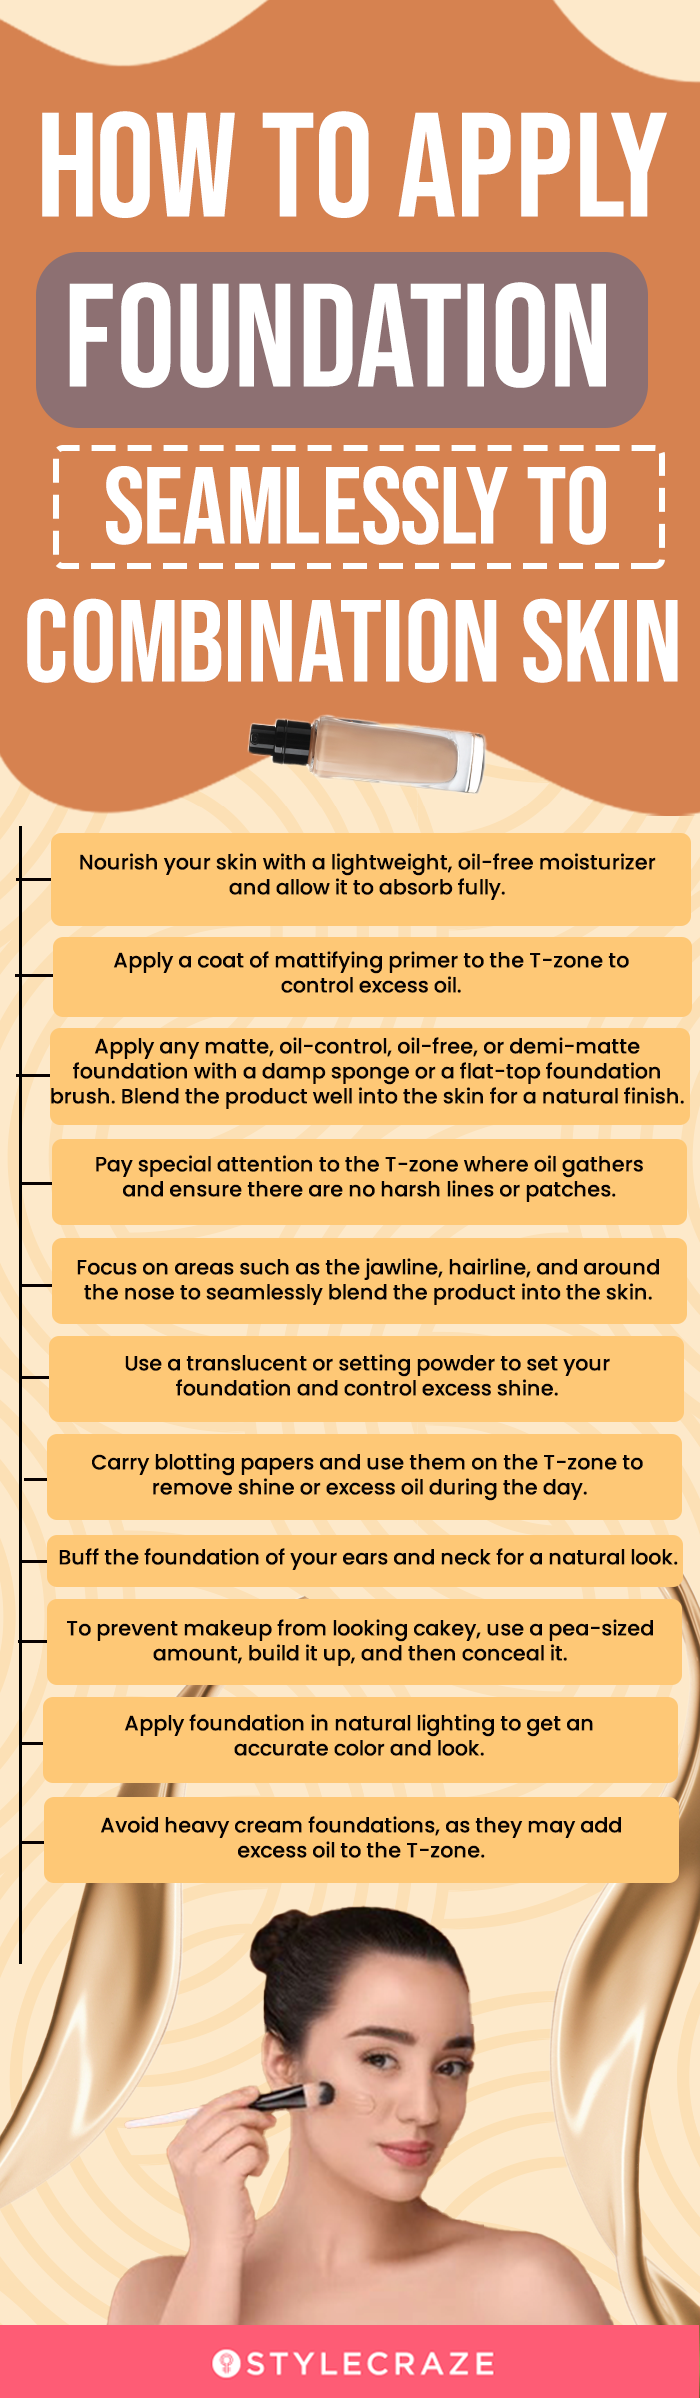 How To Apply Foundation Seamlessly To Combination Skin(infographic)